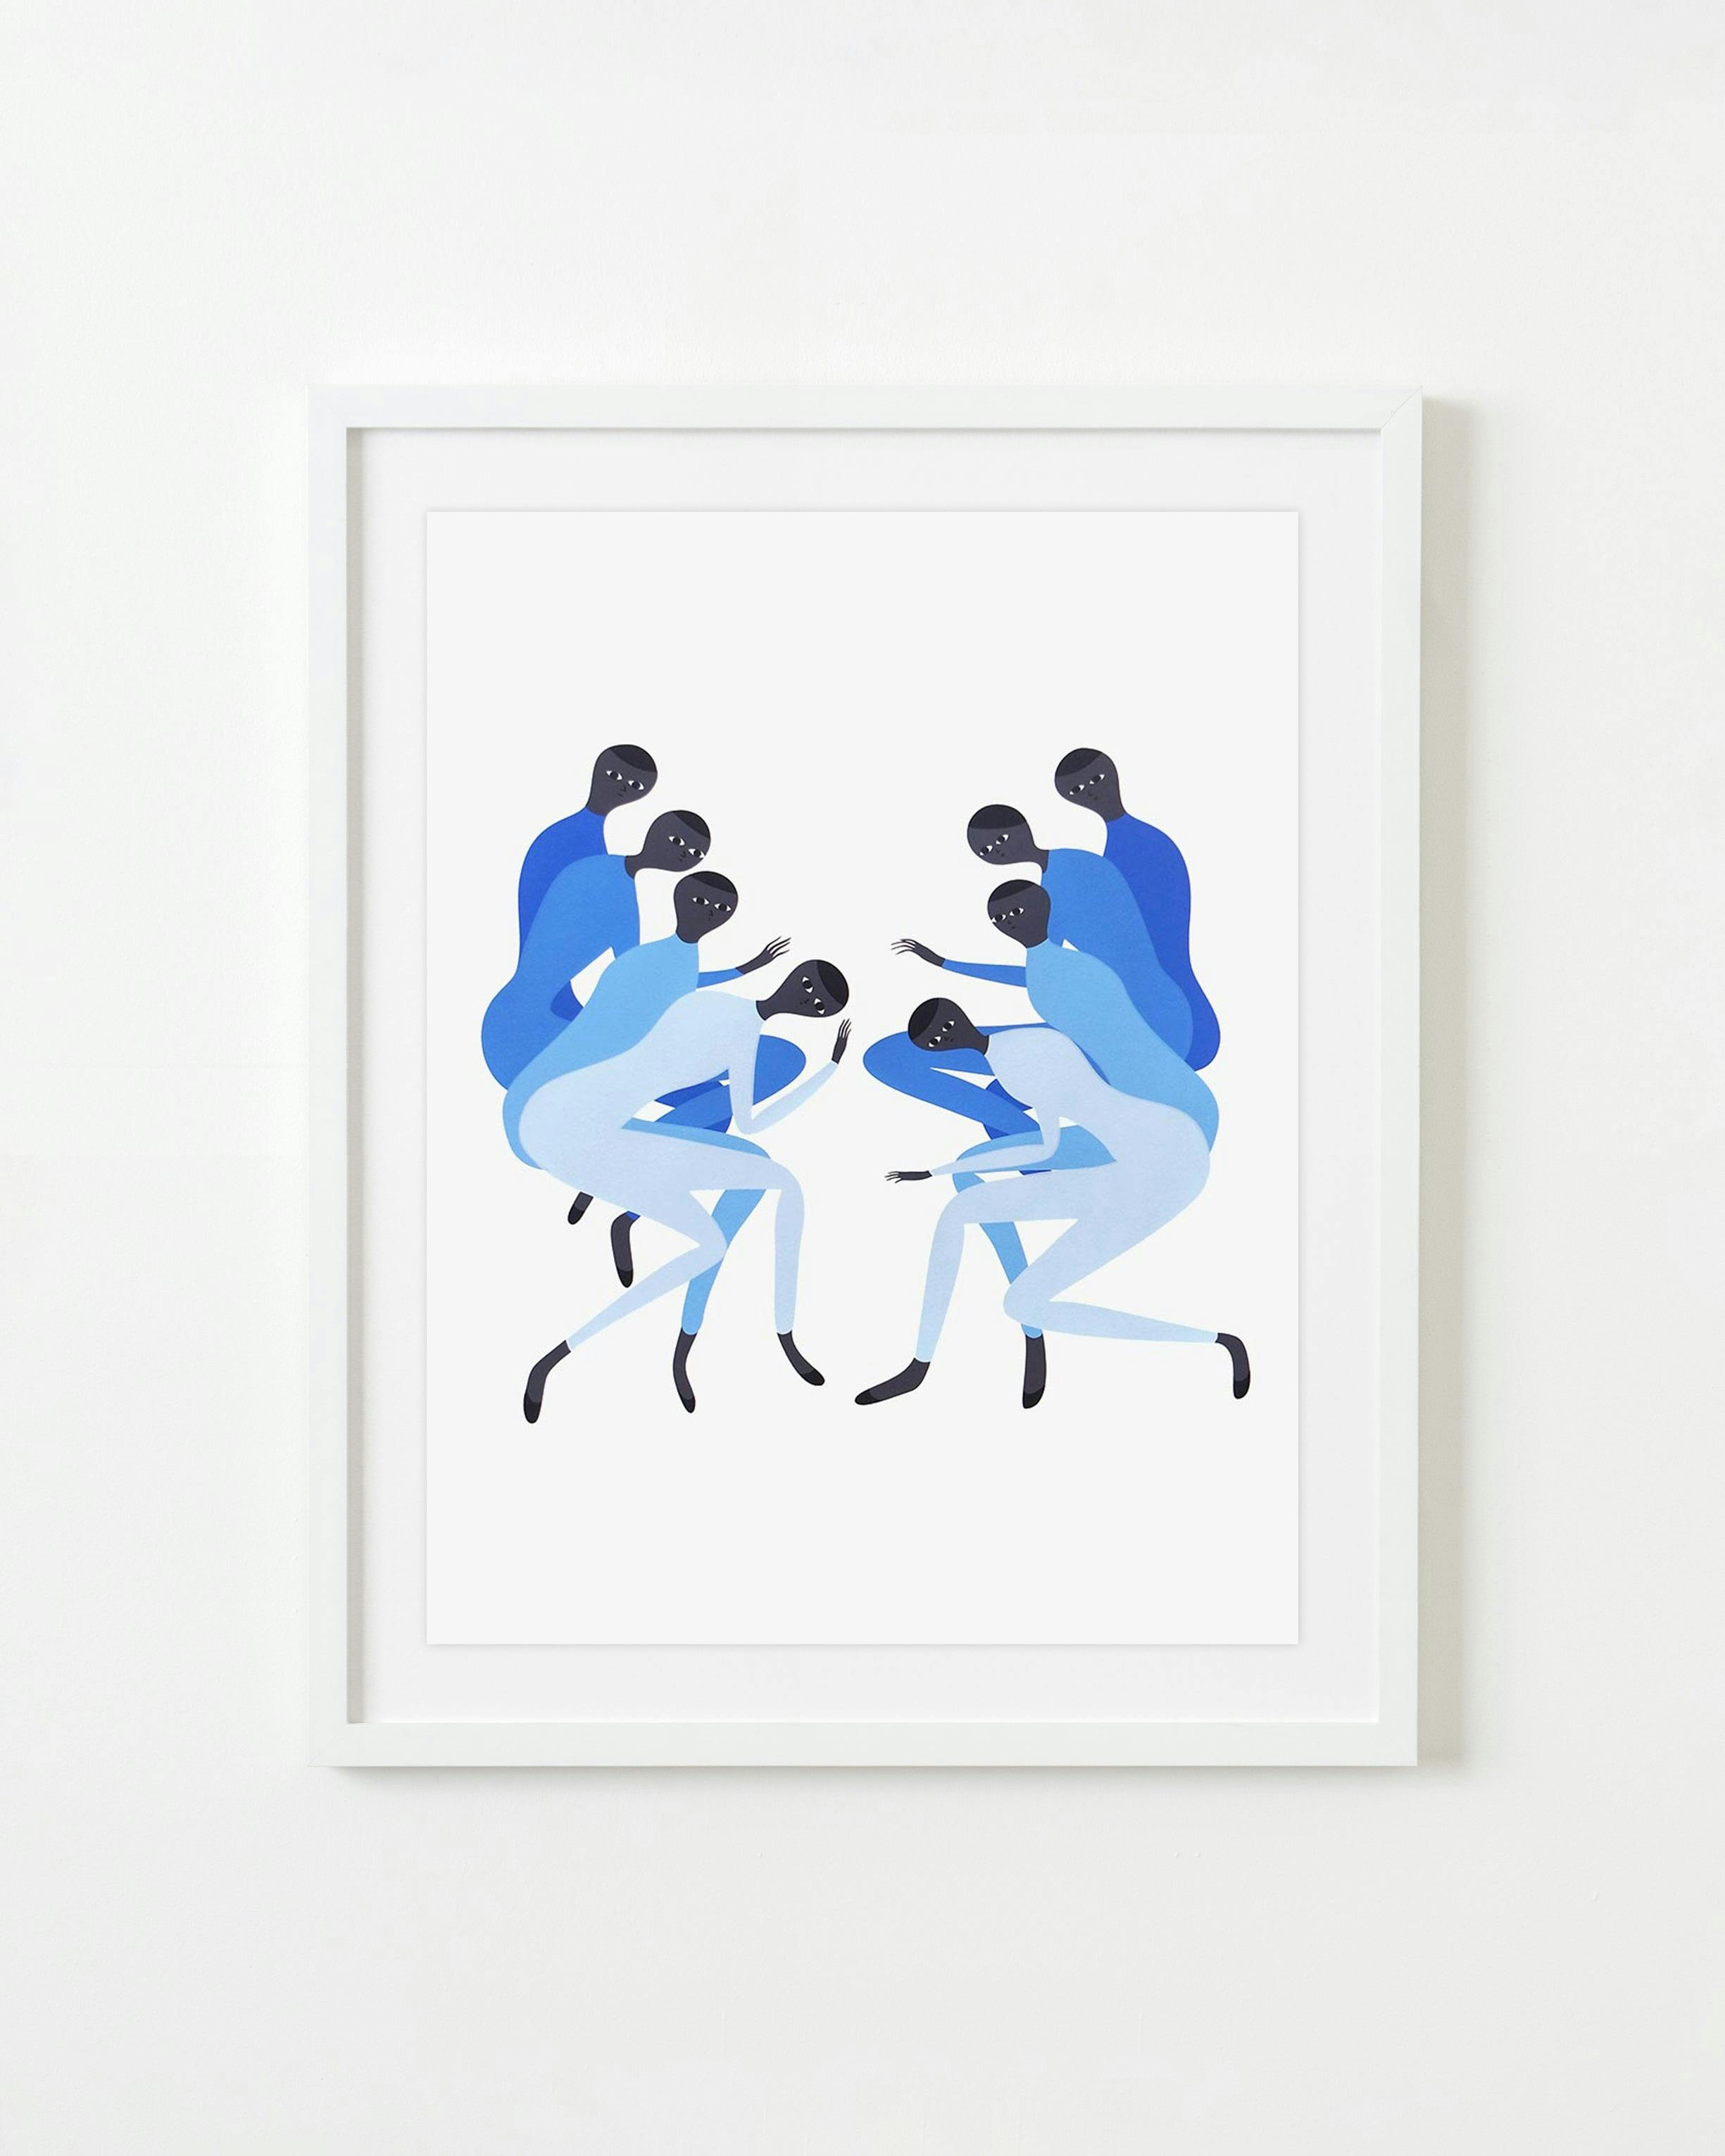 Print by Santiago Ascui titled "Blue Fall".